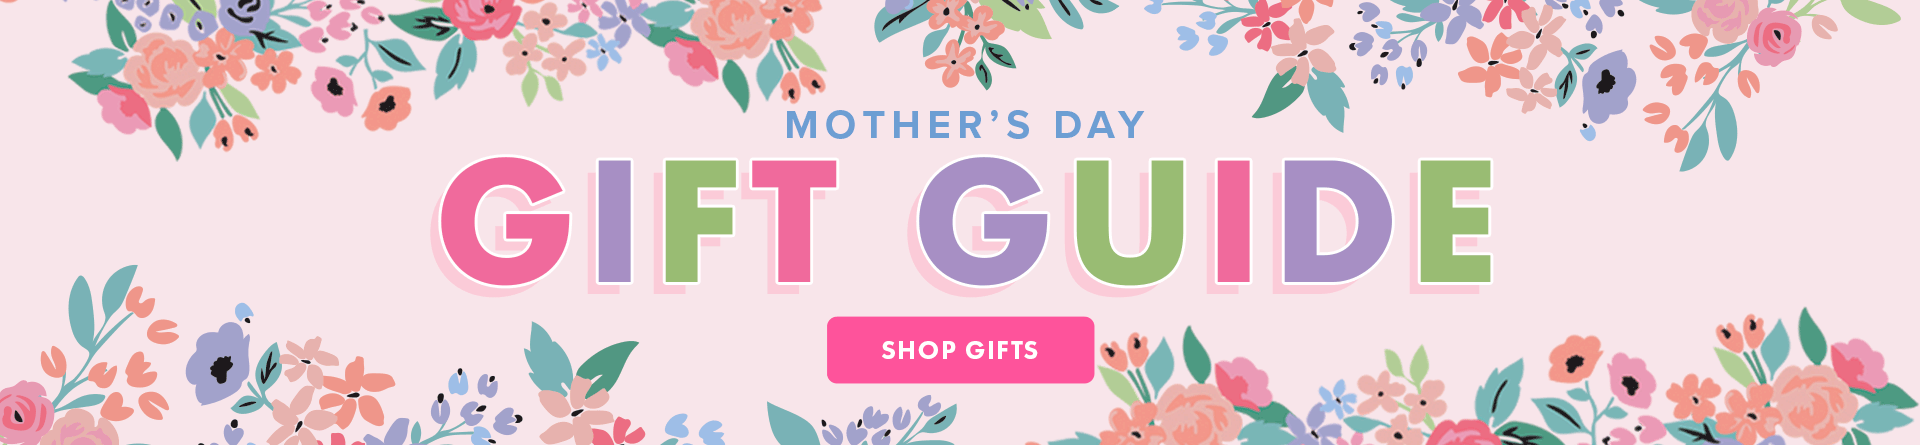 Shop Personalized Gifts for Mom